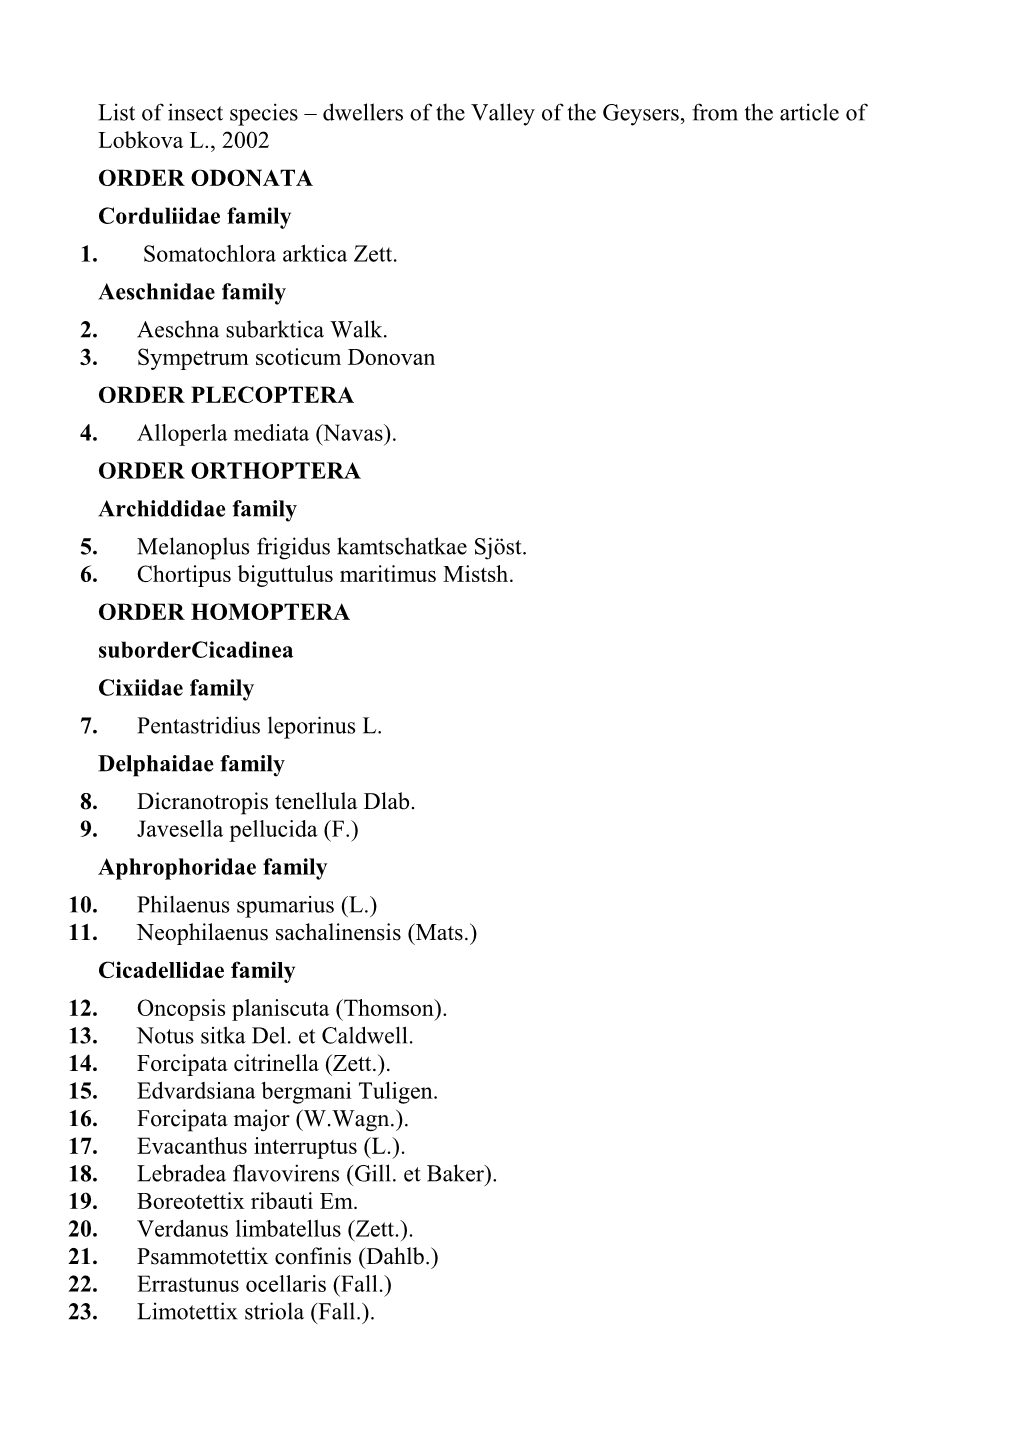 List of Insect Species Dwellers of the Valley of the Geysers, from the Article of Lobkova